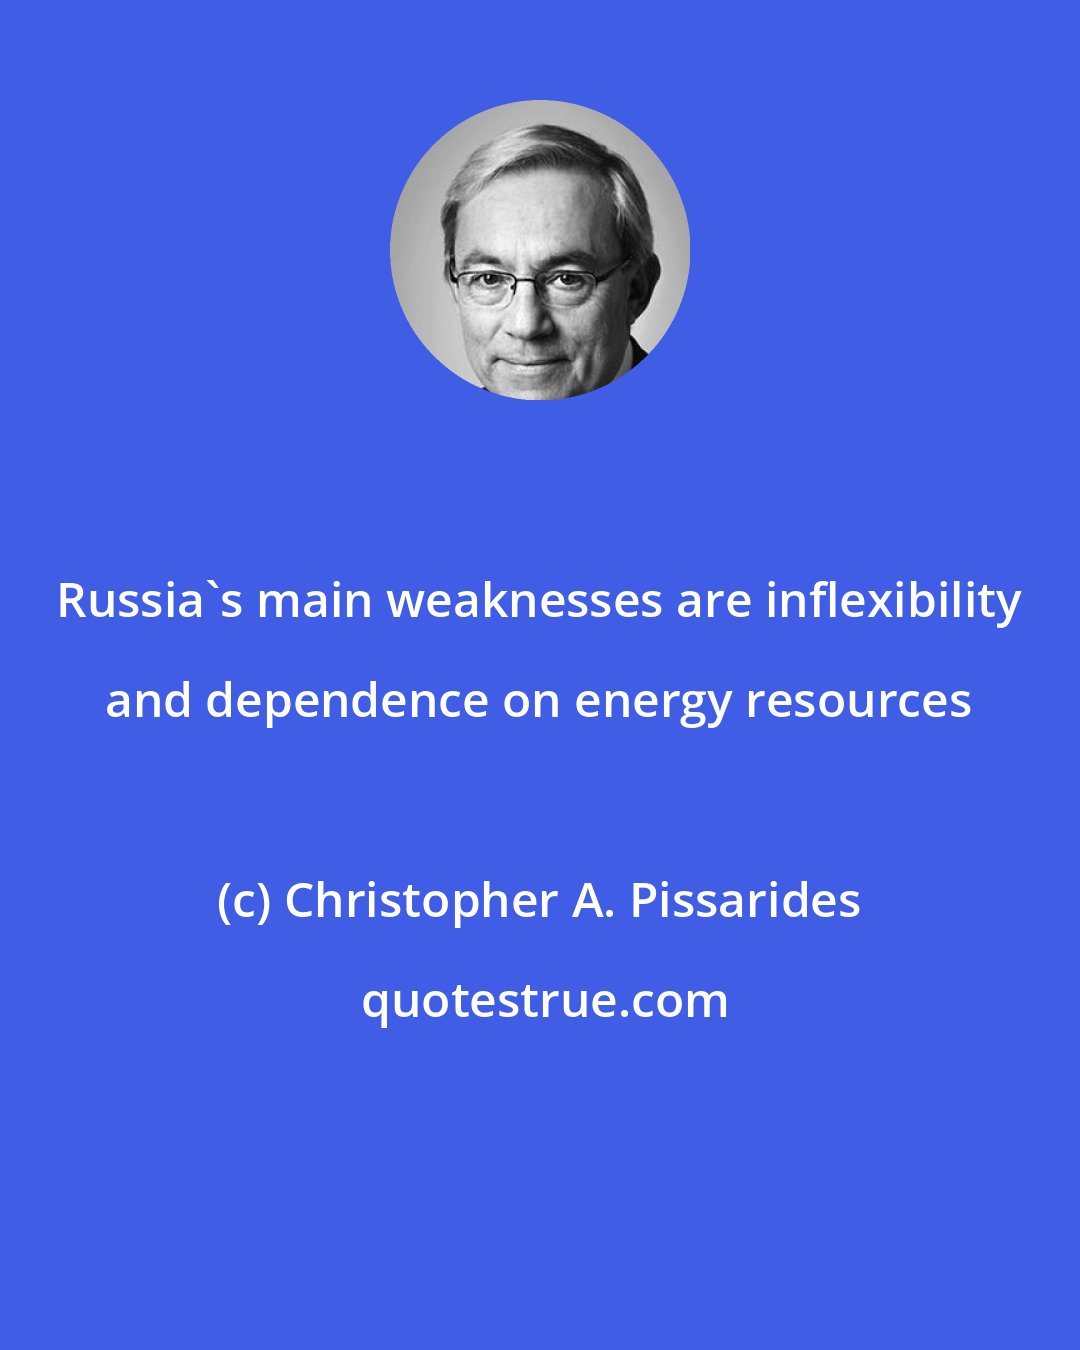 Christopher A. Pissarides: Russia's main weaknesses are inflexibility and dependence on energy resources